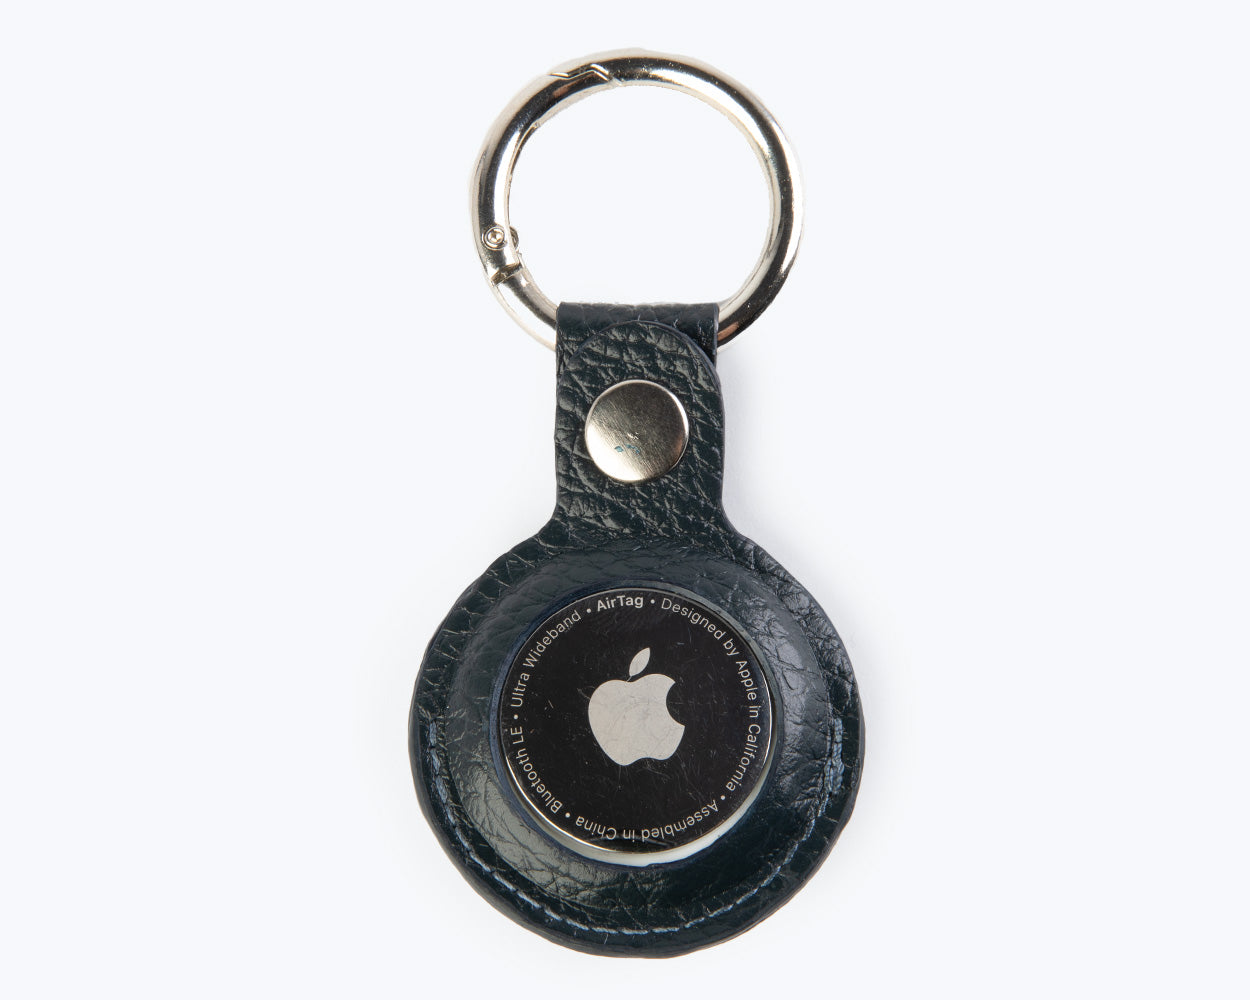 Metro Leather Apple Air Tag Case